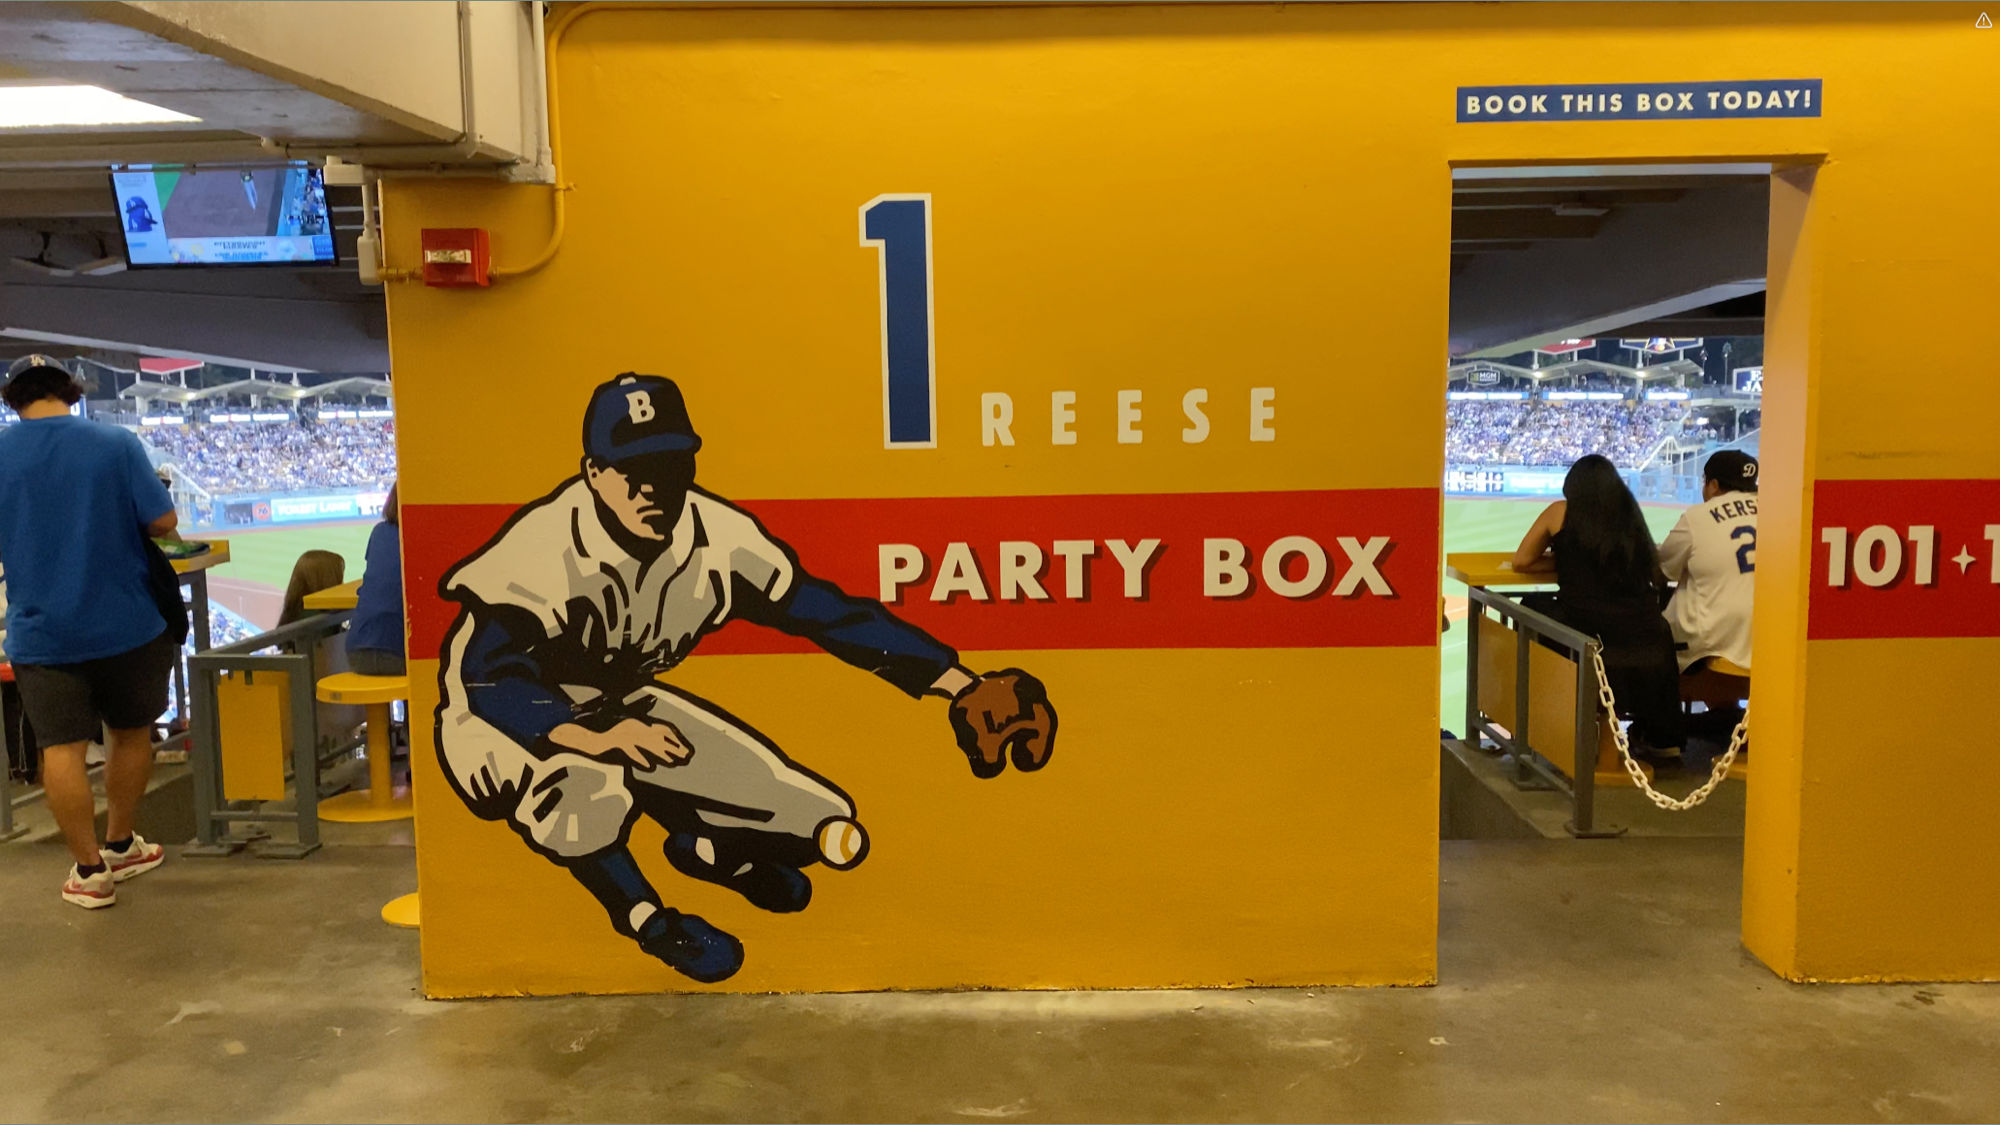 Pee Wee Reese Party Box 101